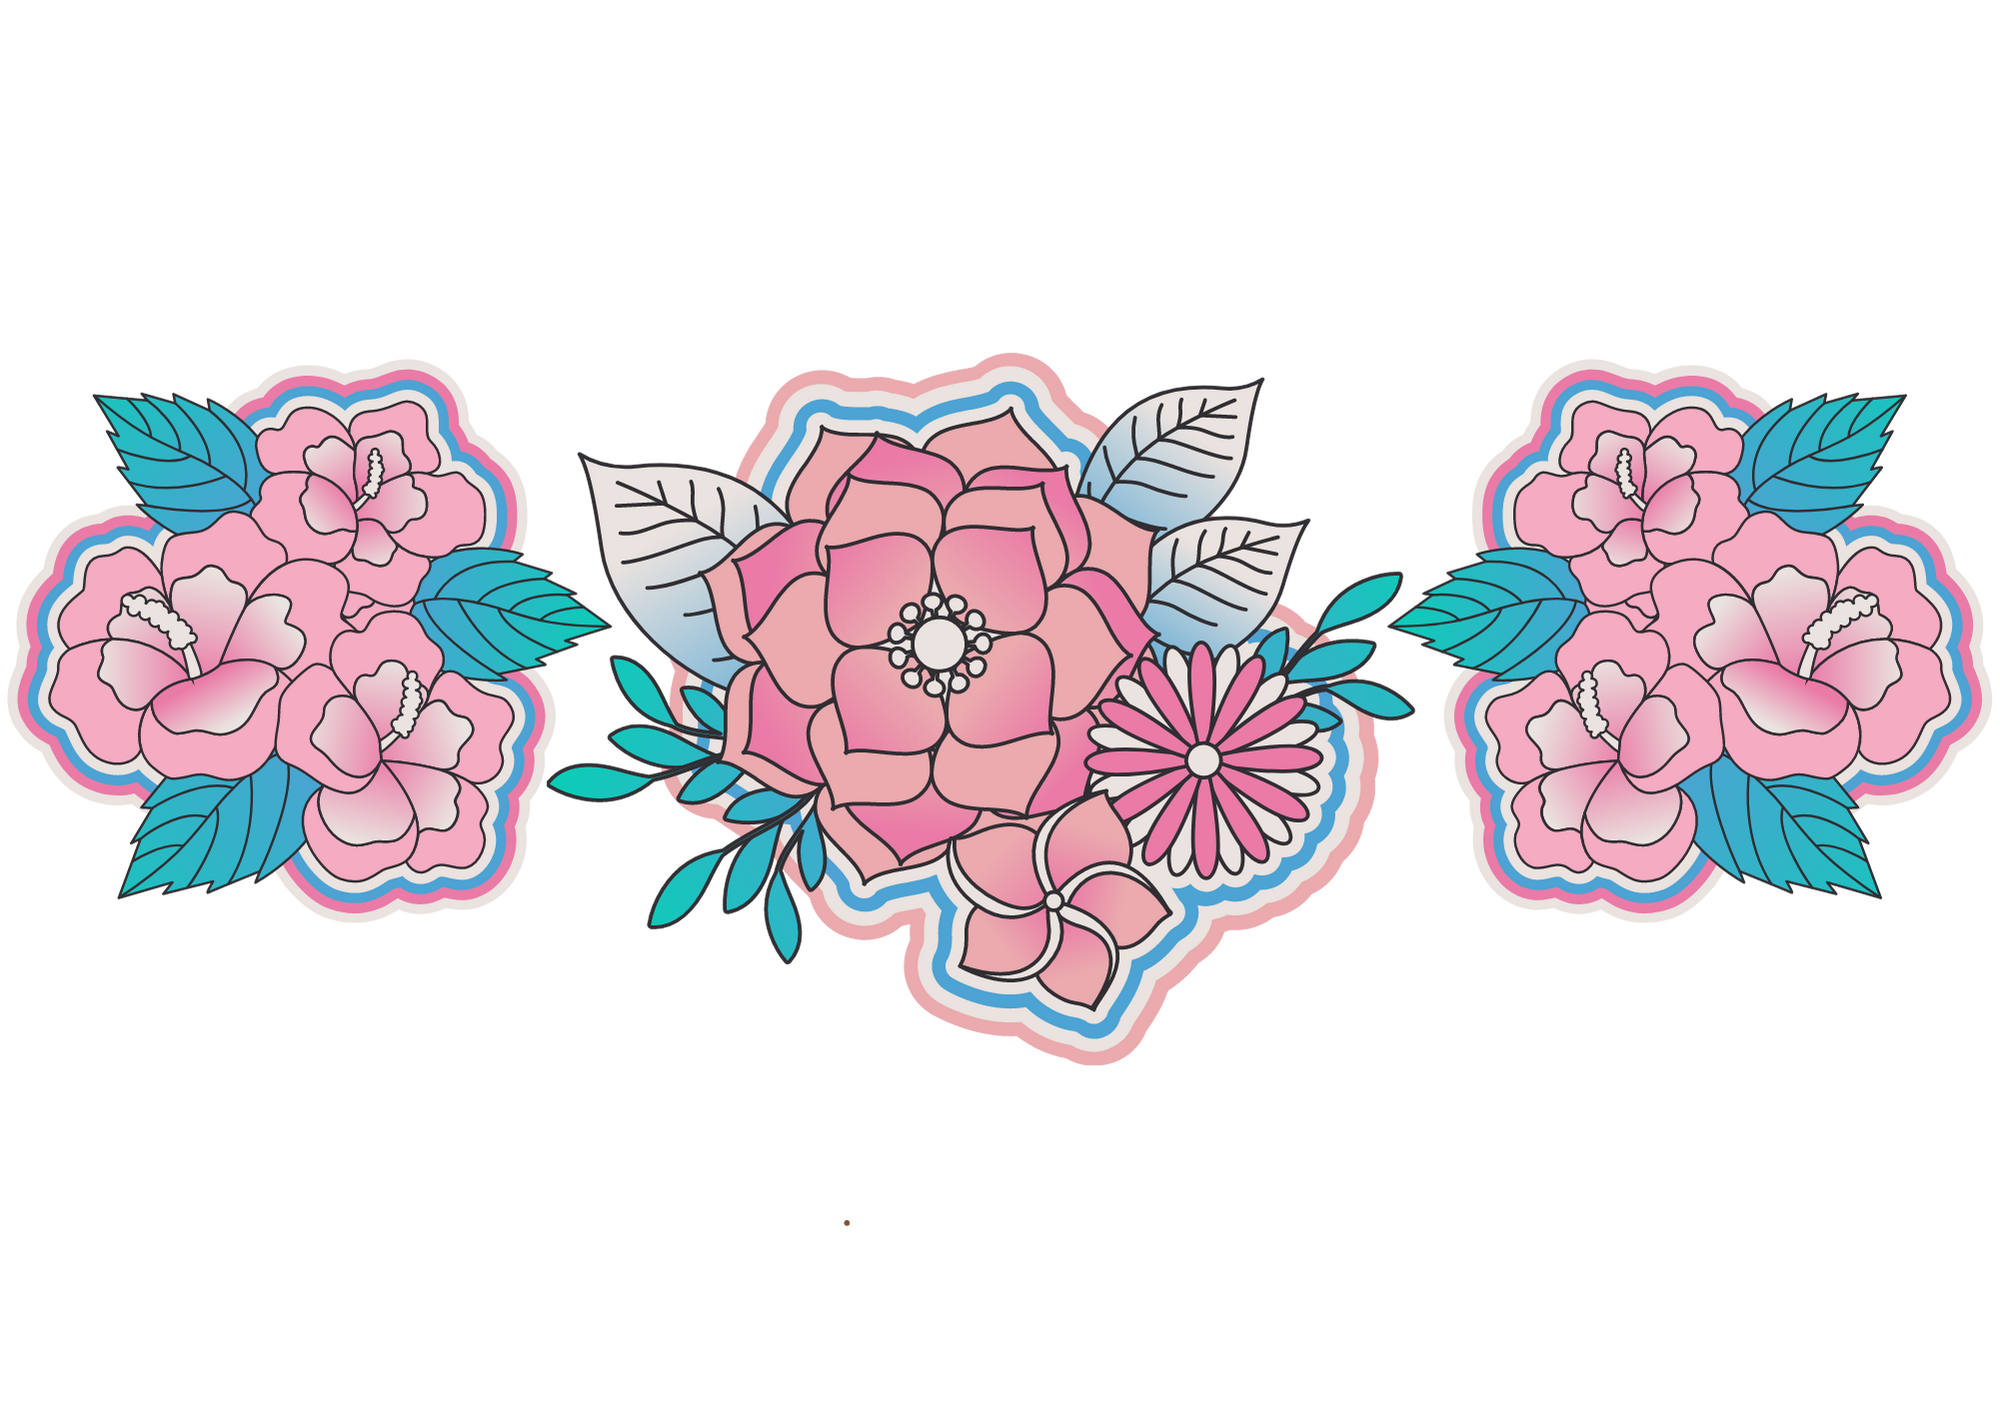 Stock art illustration of flowers in pink and blue trans pride colors